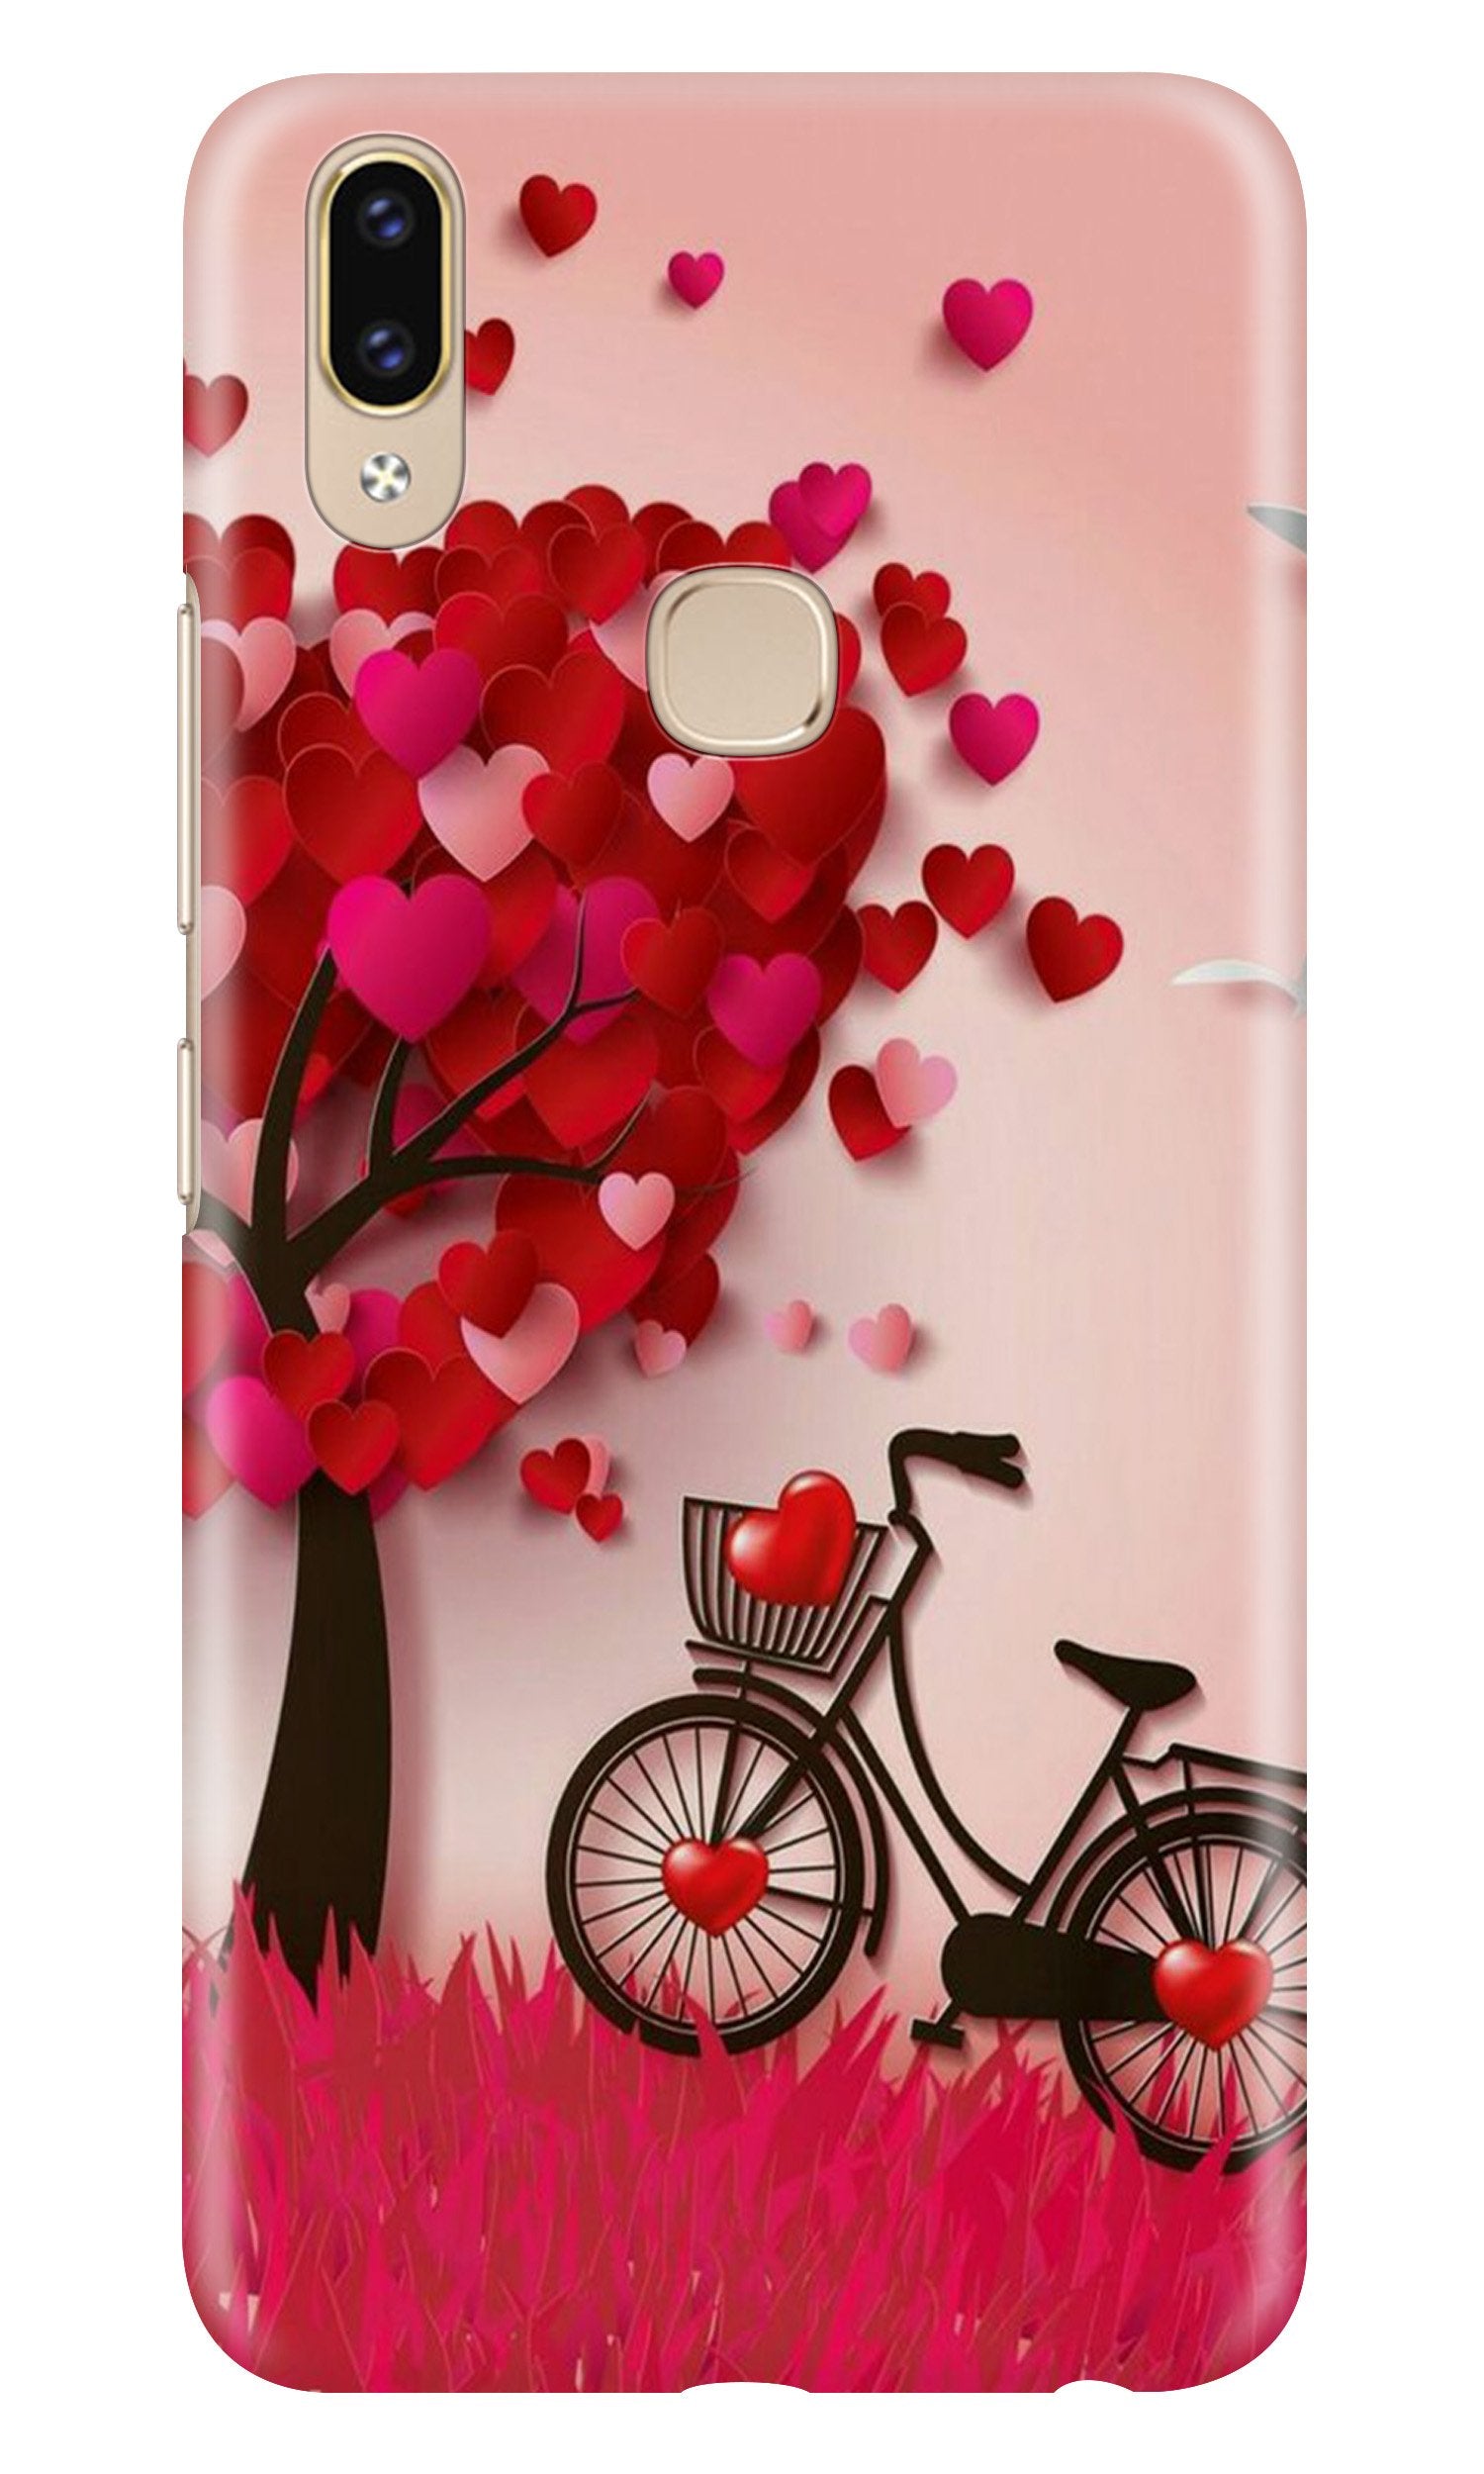 Red Heart Cycle Case for Asus Zenfone Max Pro M2 (Design No. 222)